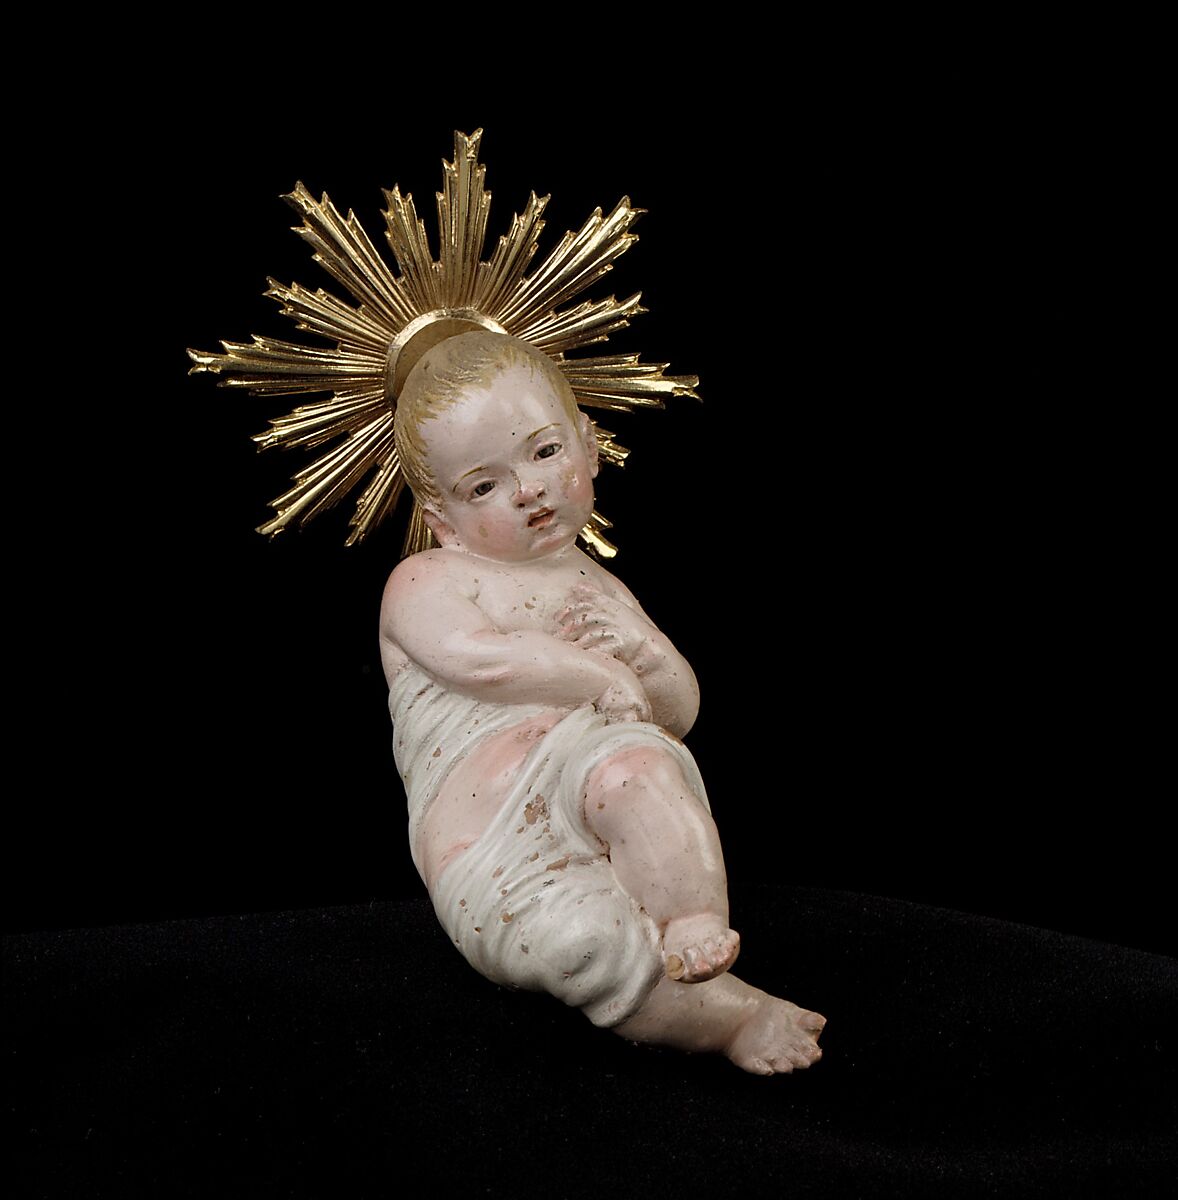 Infant Jesus, Giuseppe Sanmartino, Polychromed terracotta, charred wood and rope, silver-gilt halo